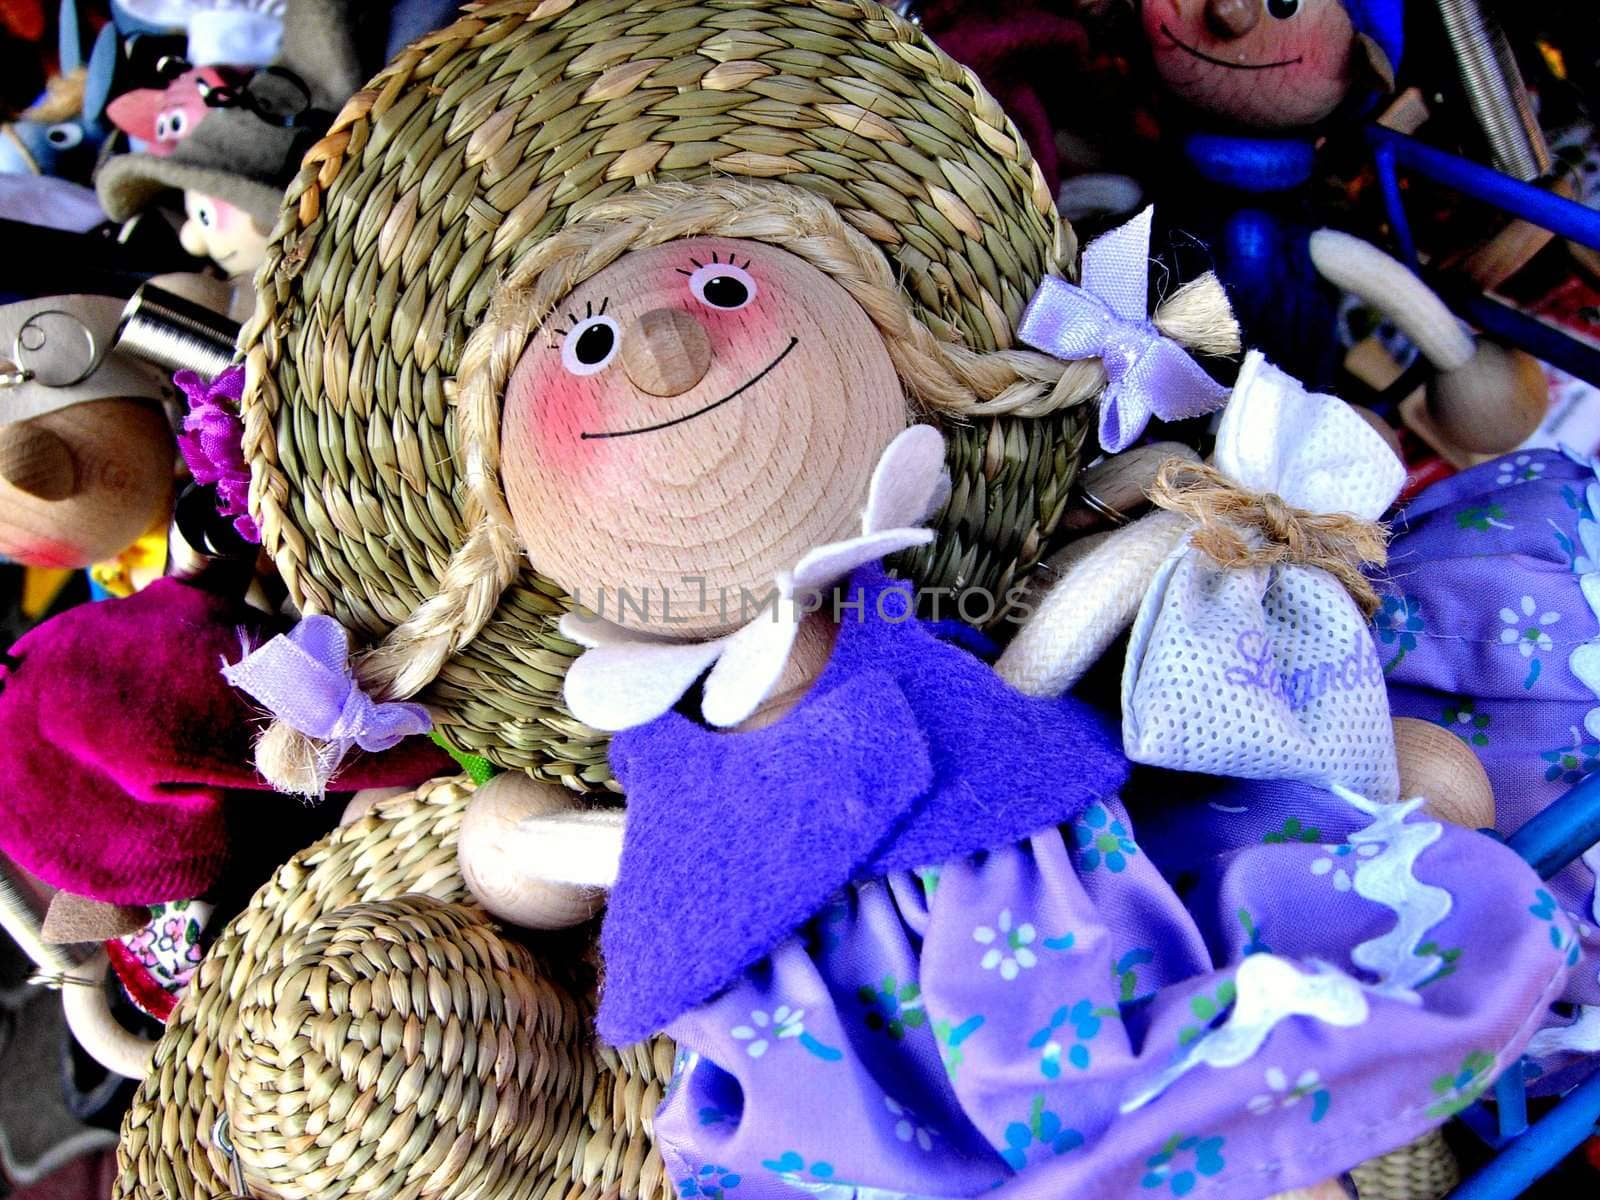 Souvenir Doll Smiling in Hungary Shop